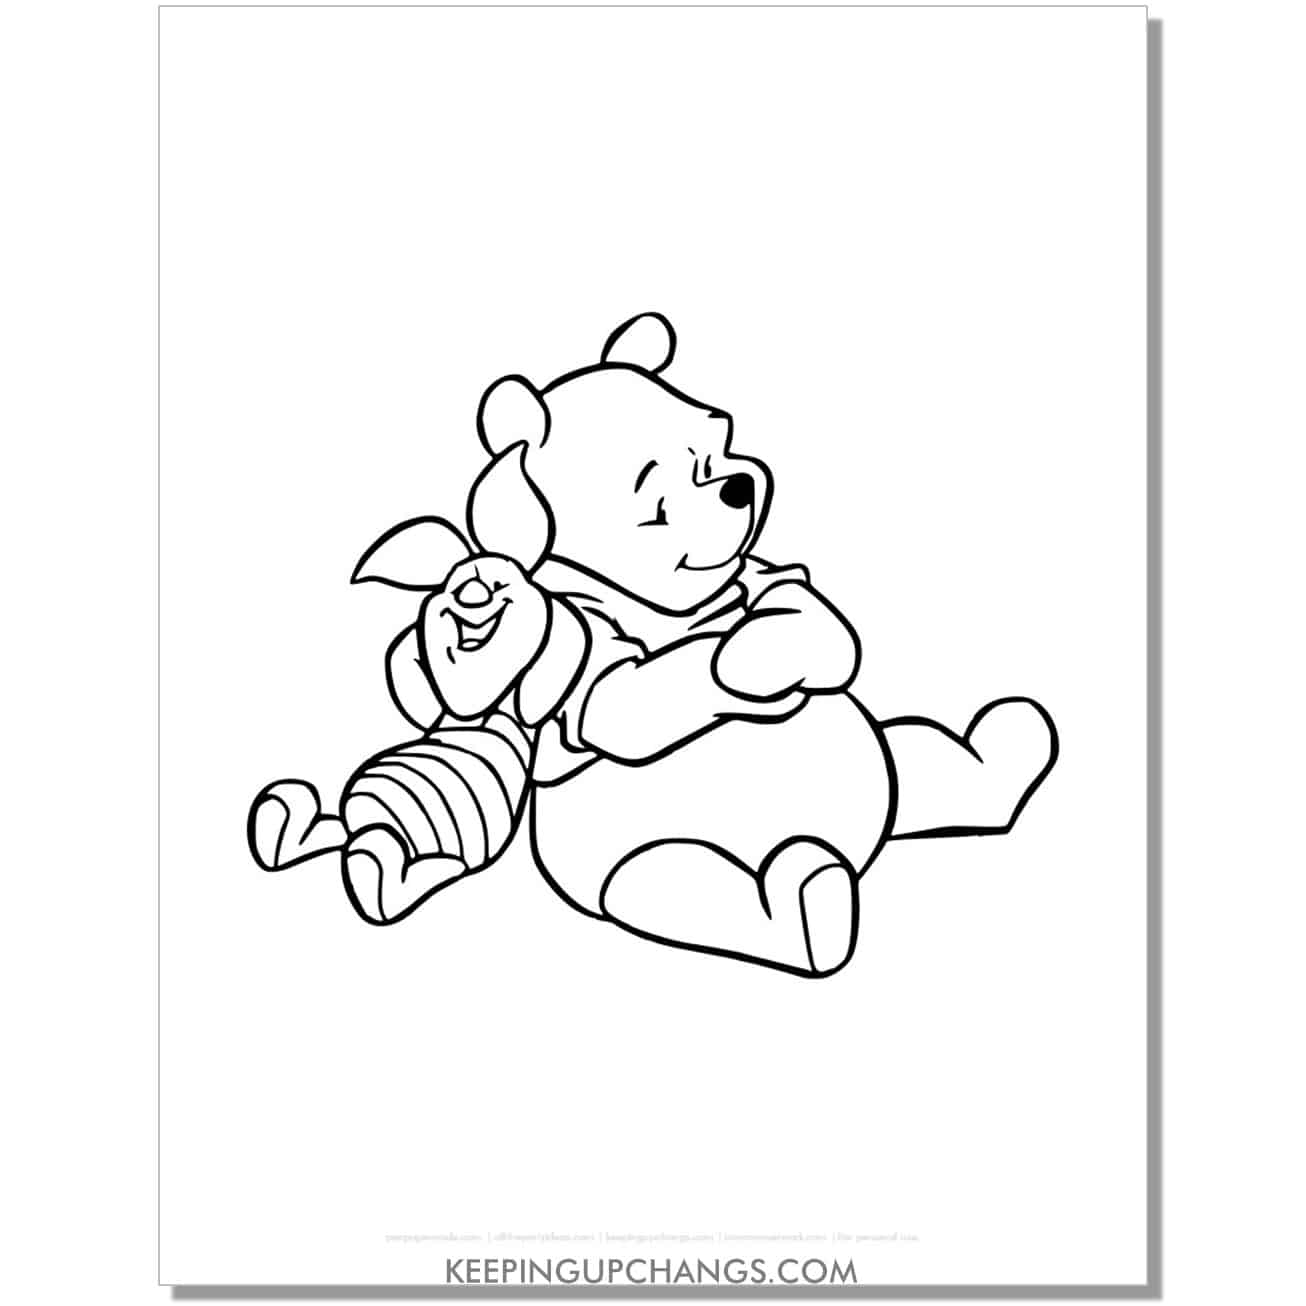 winnie the pooh resting on piglet coloring page, sheet.